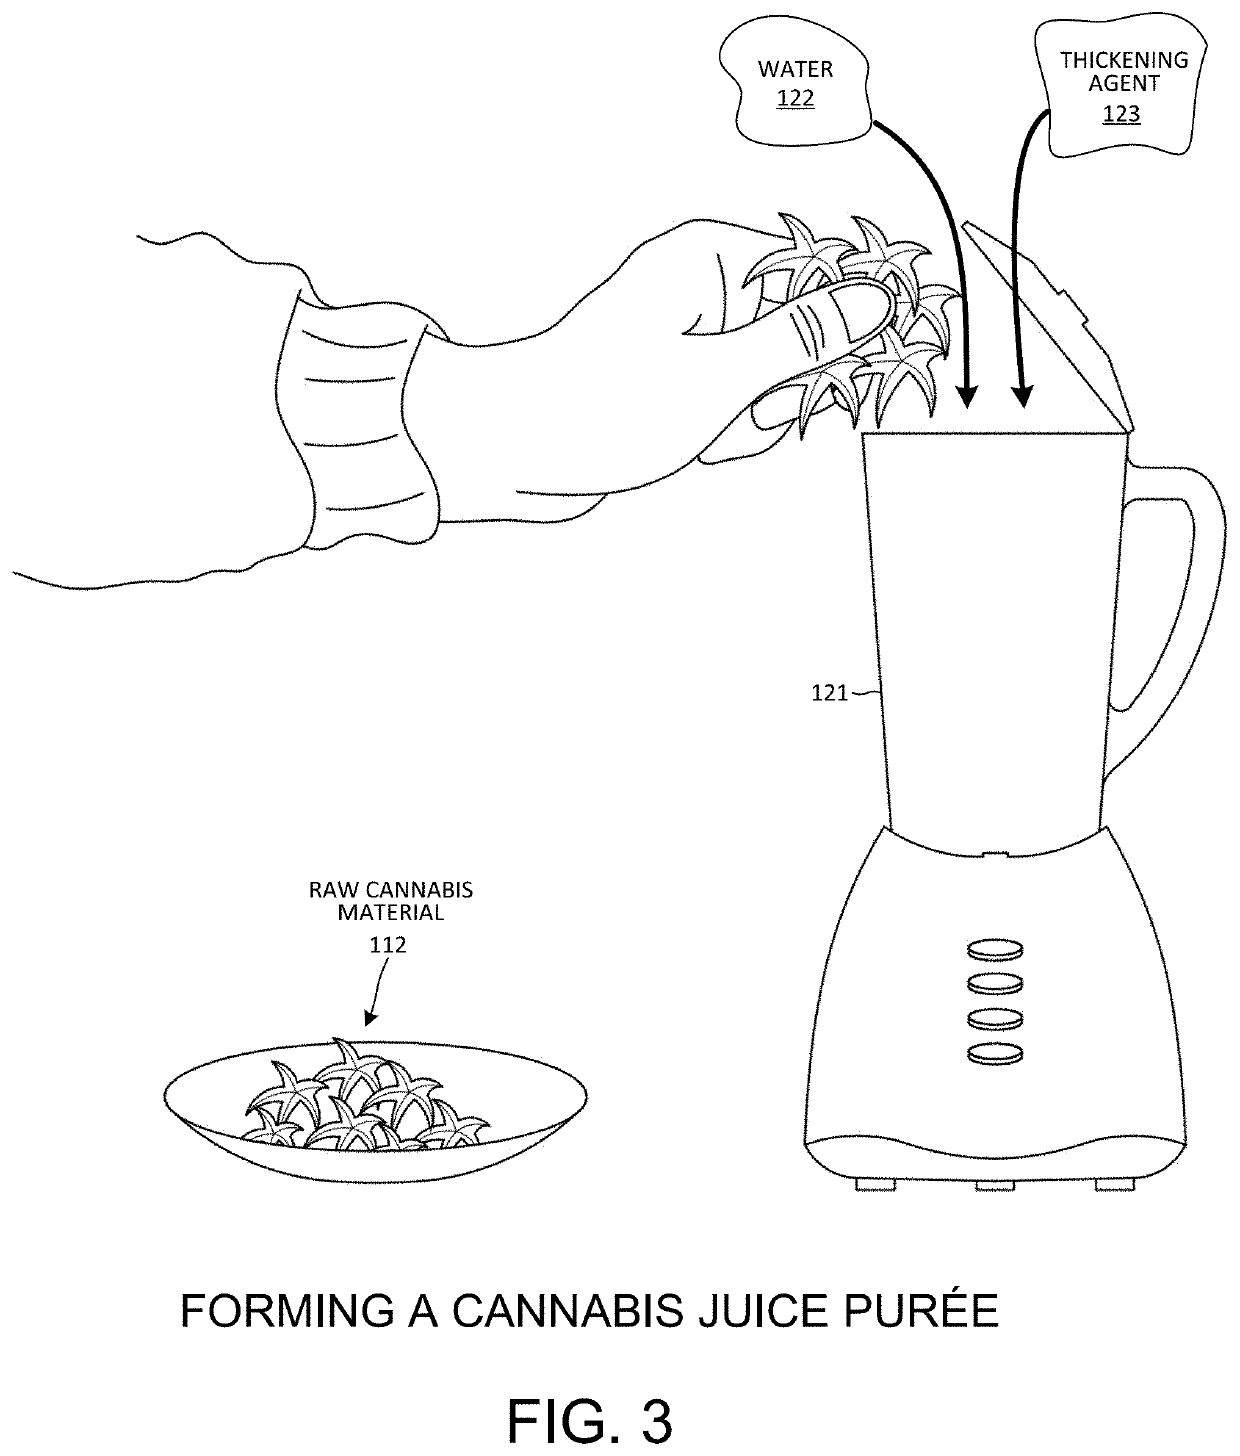 Packaged frozen cubes of cannabis juice purée with added decarboxylated cannabis material